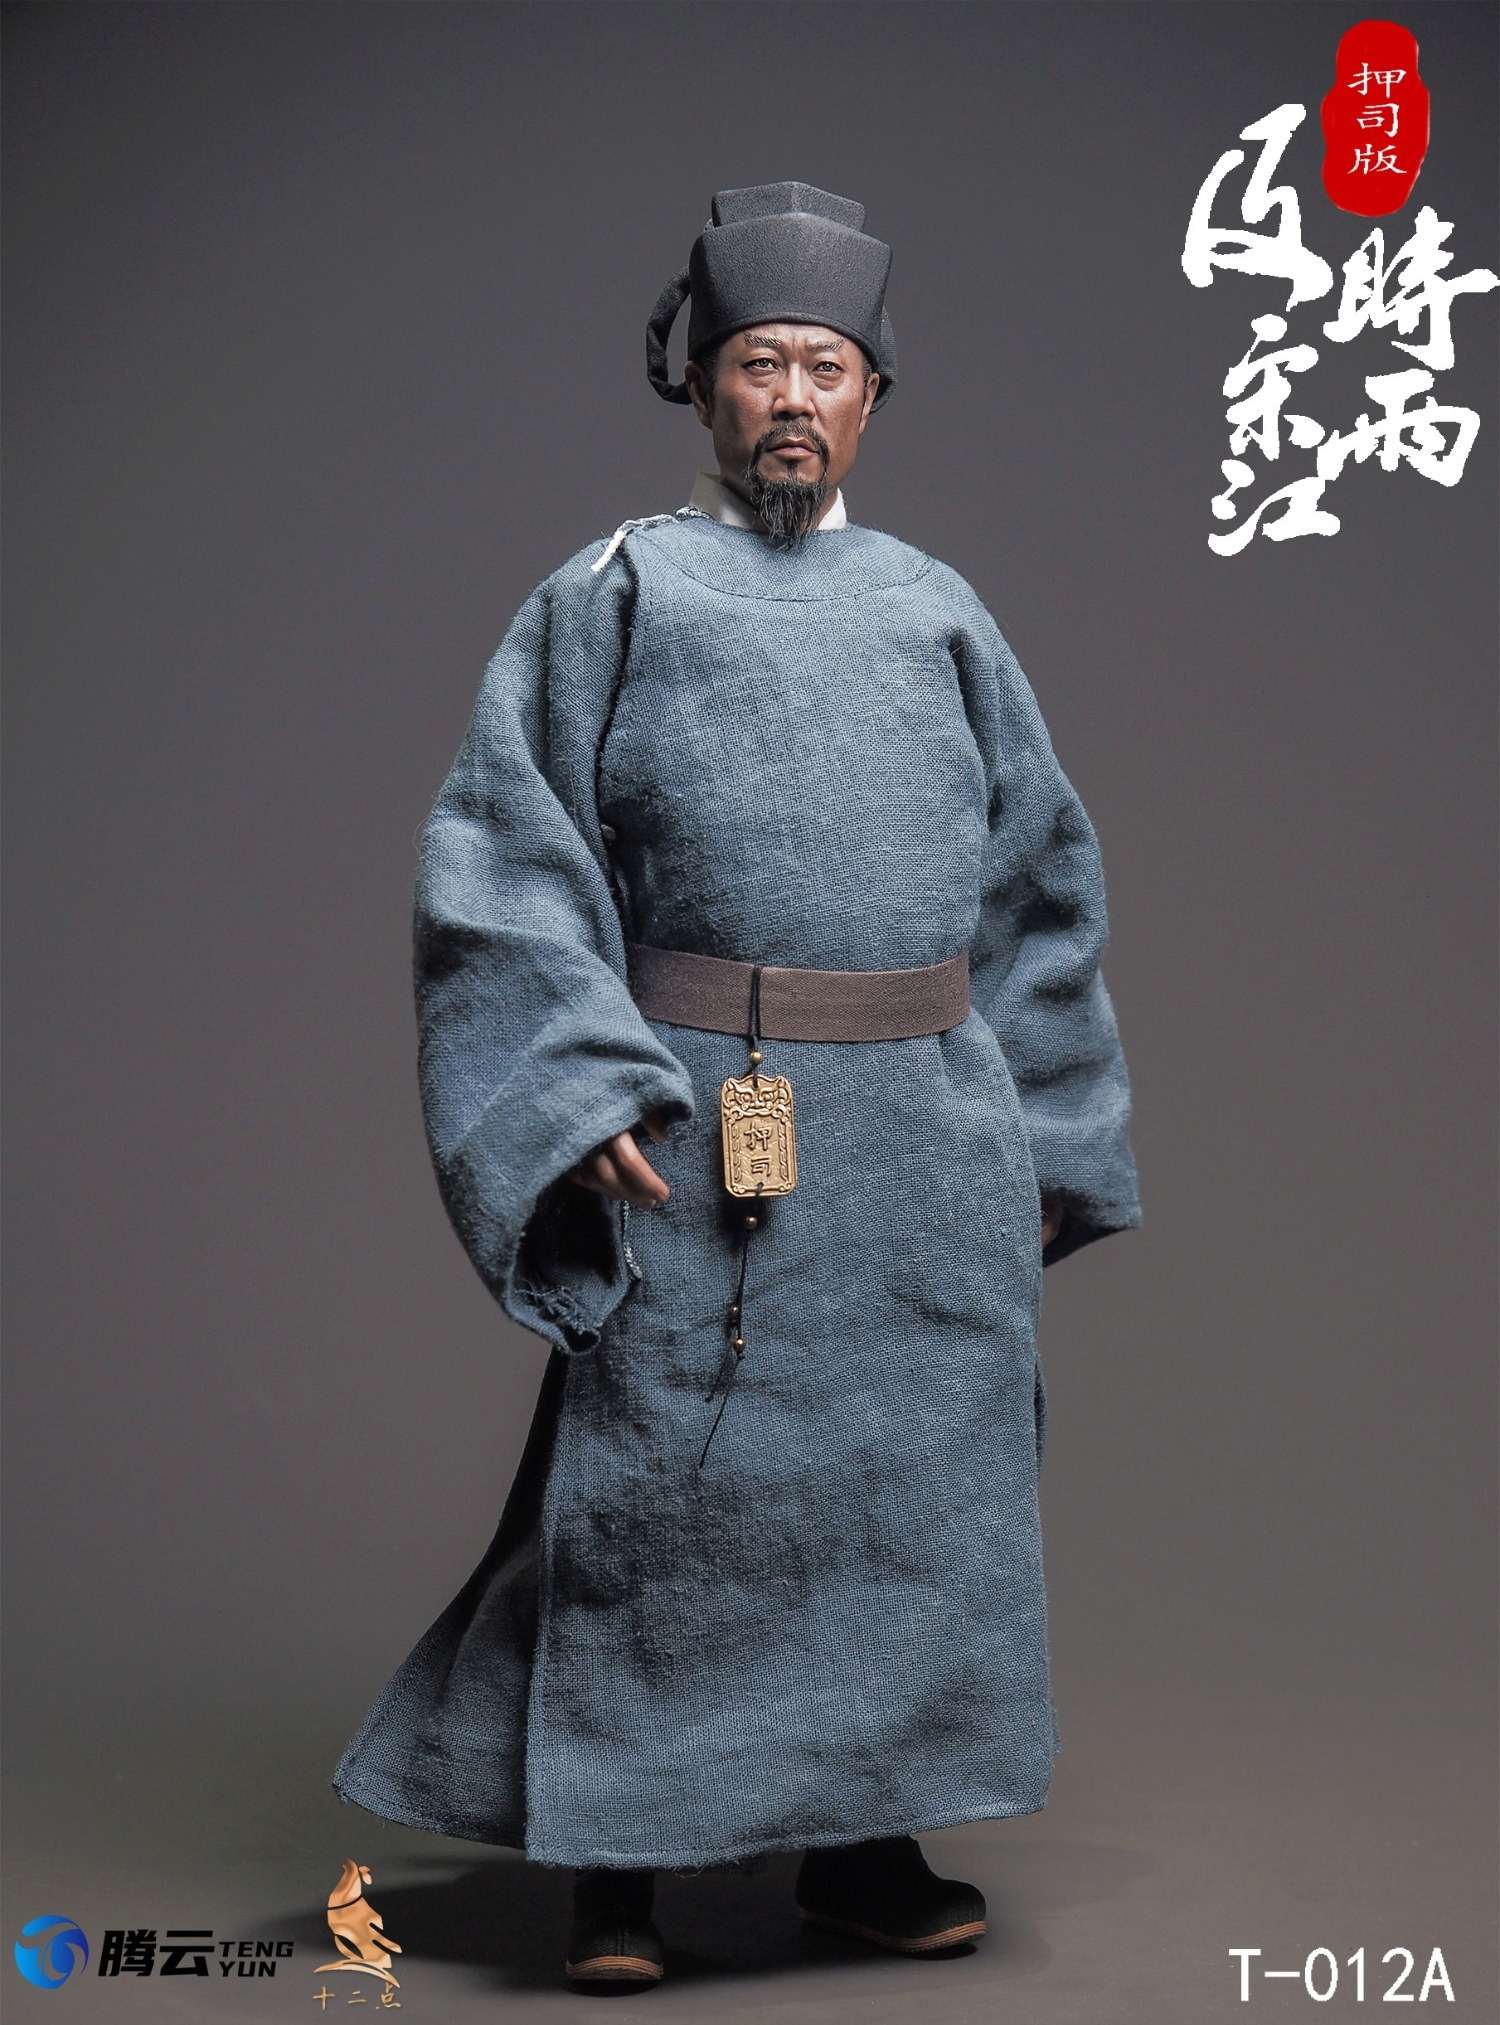 NEW PRODUCT: Twelve O'Clock - Hero Series - Timely Rain Song Jiang (Oshi Version / Leader Version) #T-012A/B/C/D 08104